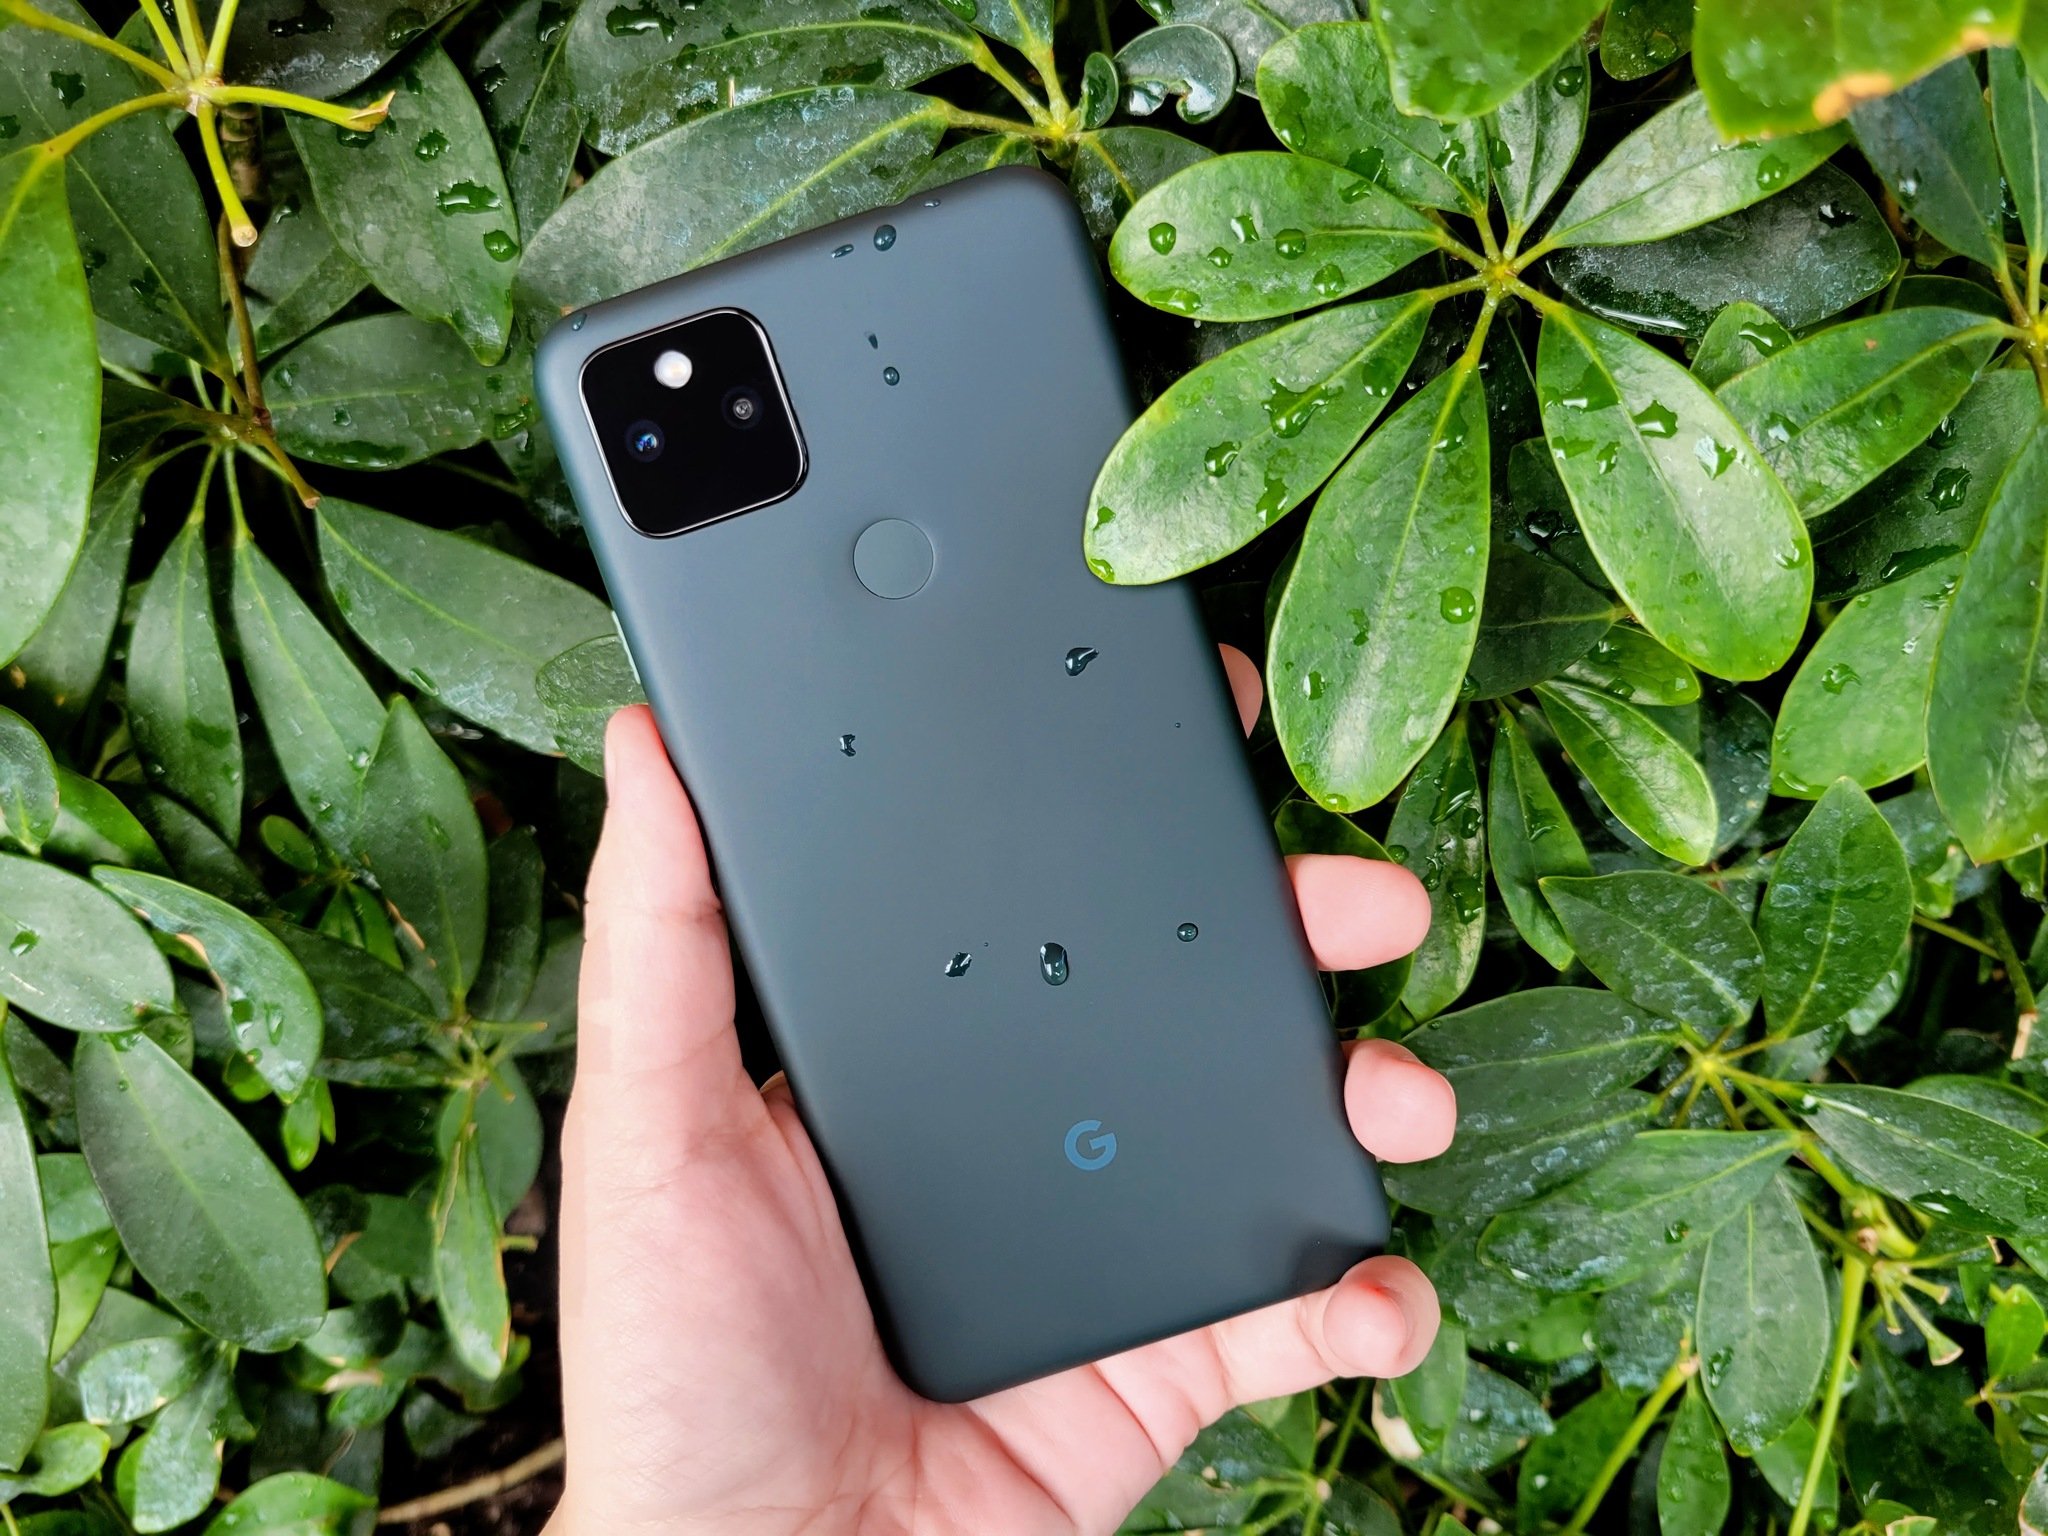 Pixel January update contains bug fixes, but Pixel 6 is excluded